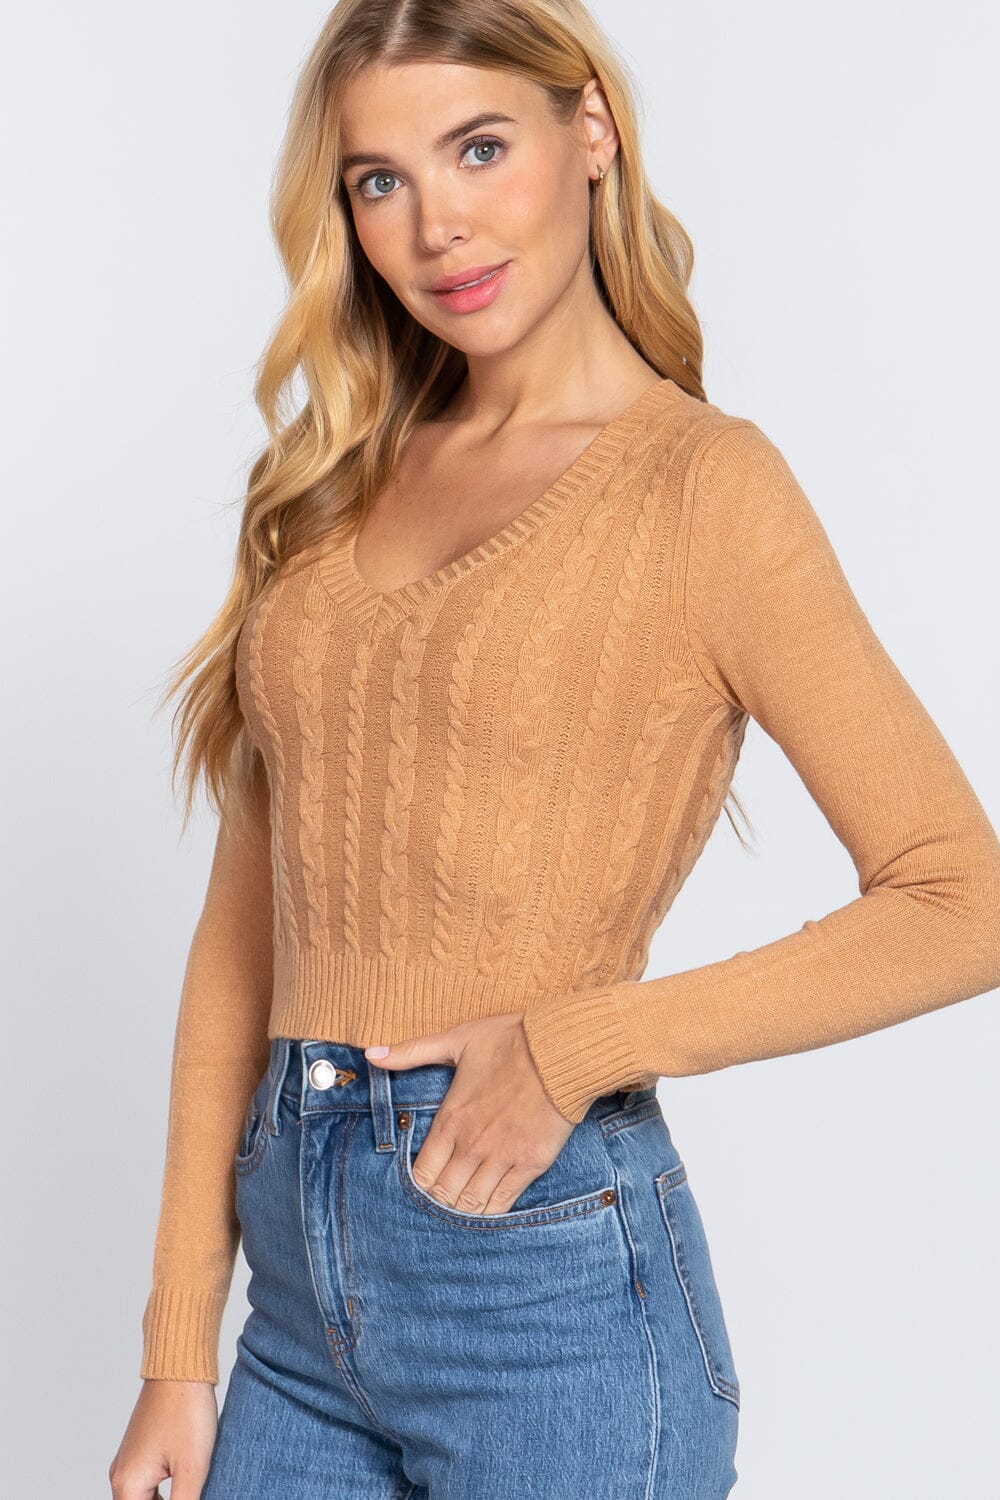 HoneyComb Yellow Long Sleeve V-neck Cable Crop Sweater Shirts & Tops jehouze 